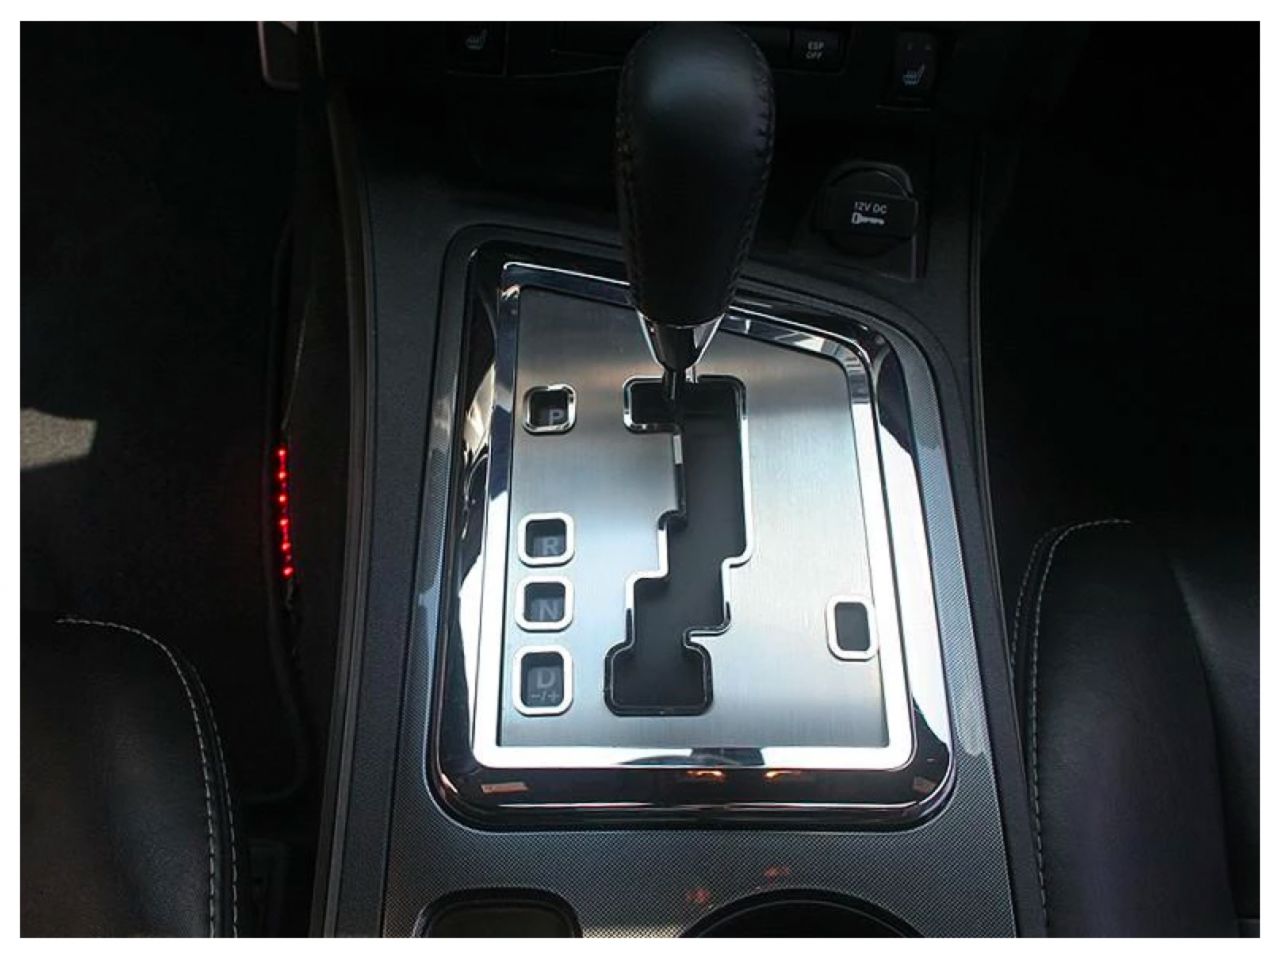 American Car Craft (ACC) 2008-2014 Dodge Challenger 5.7 and SRT 8 - Shifter Plate Brushed Auto